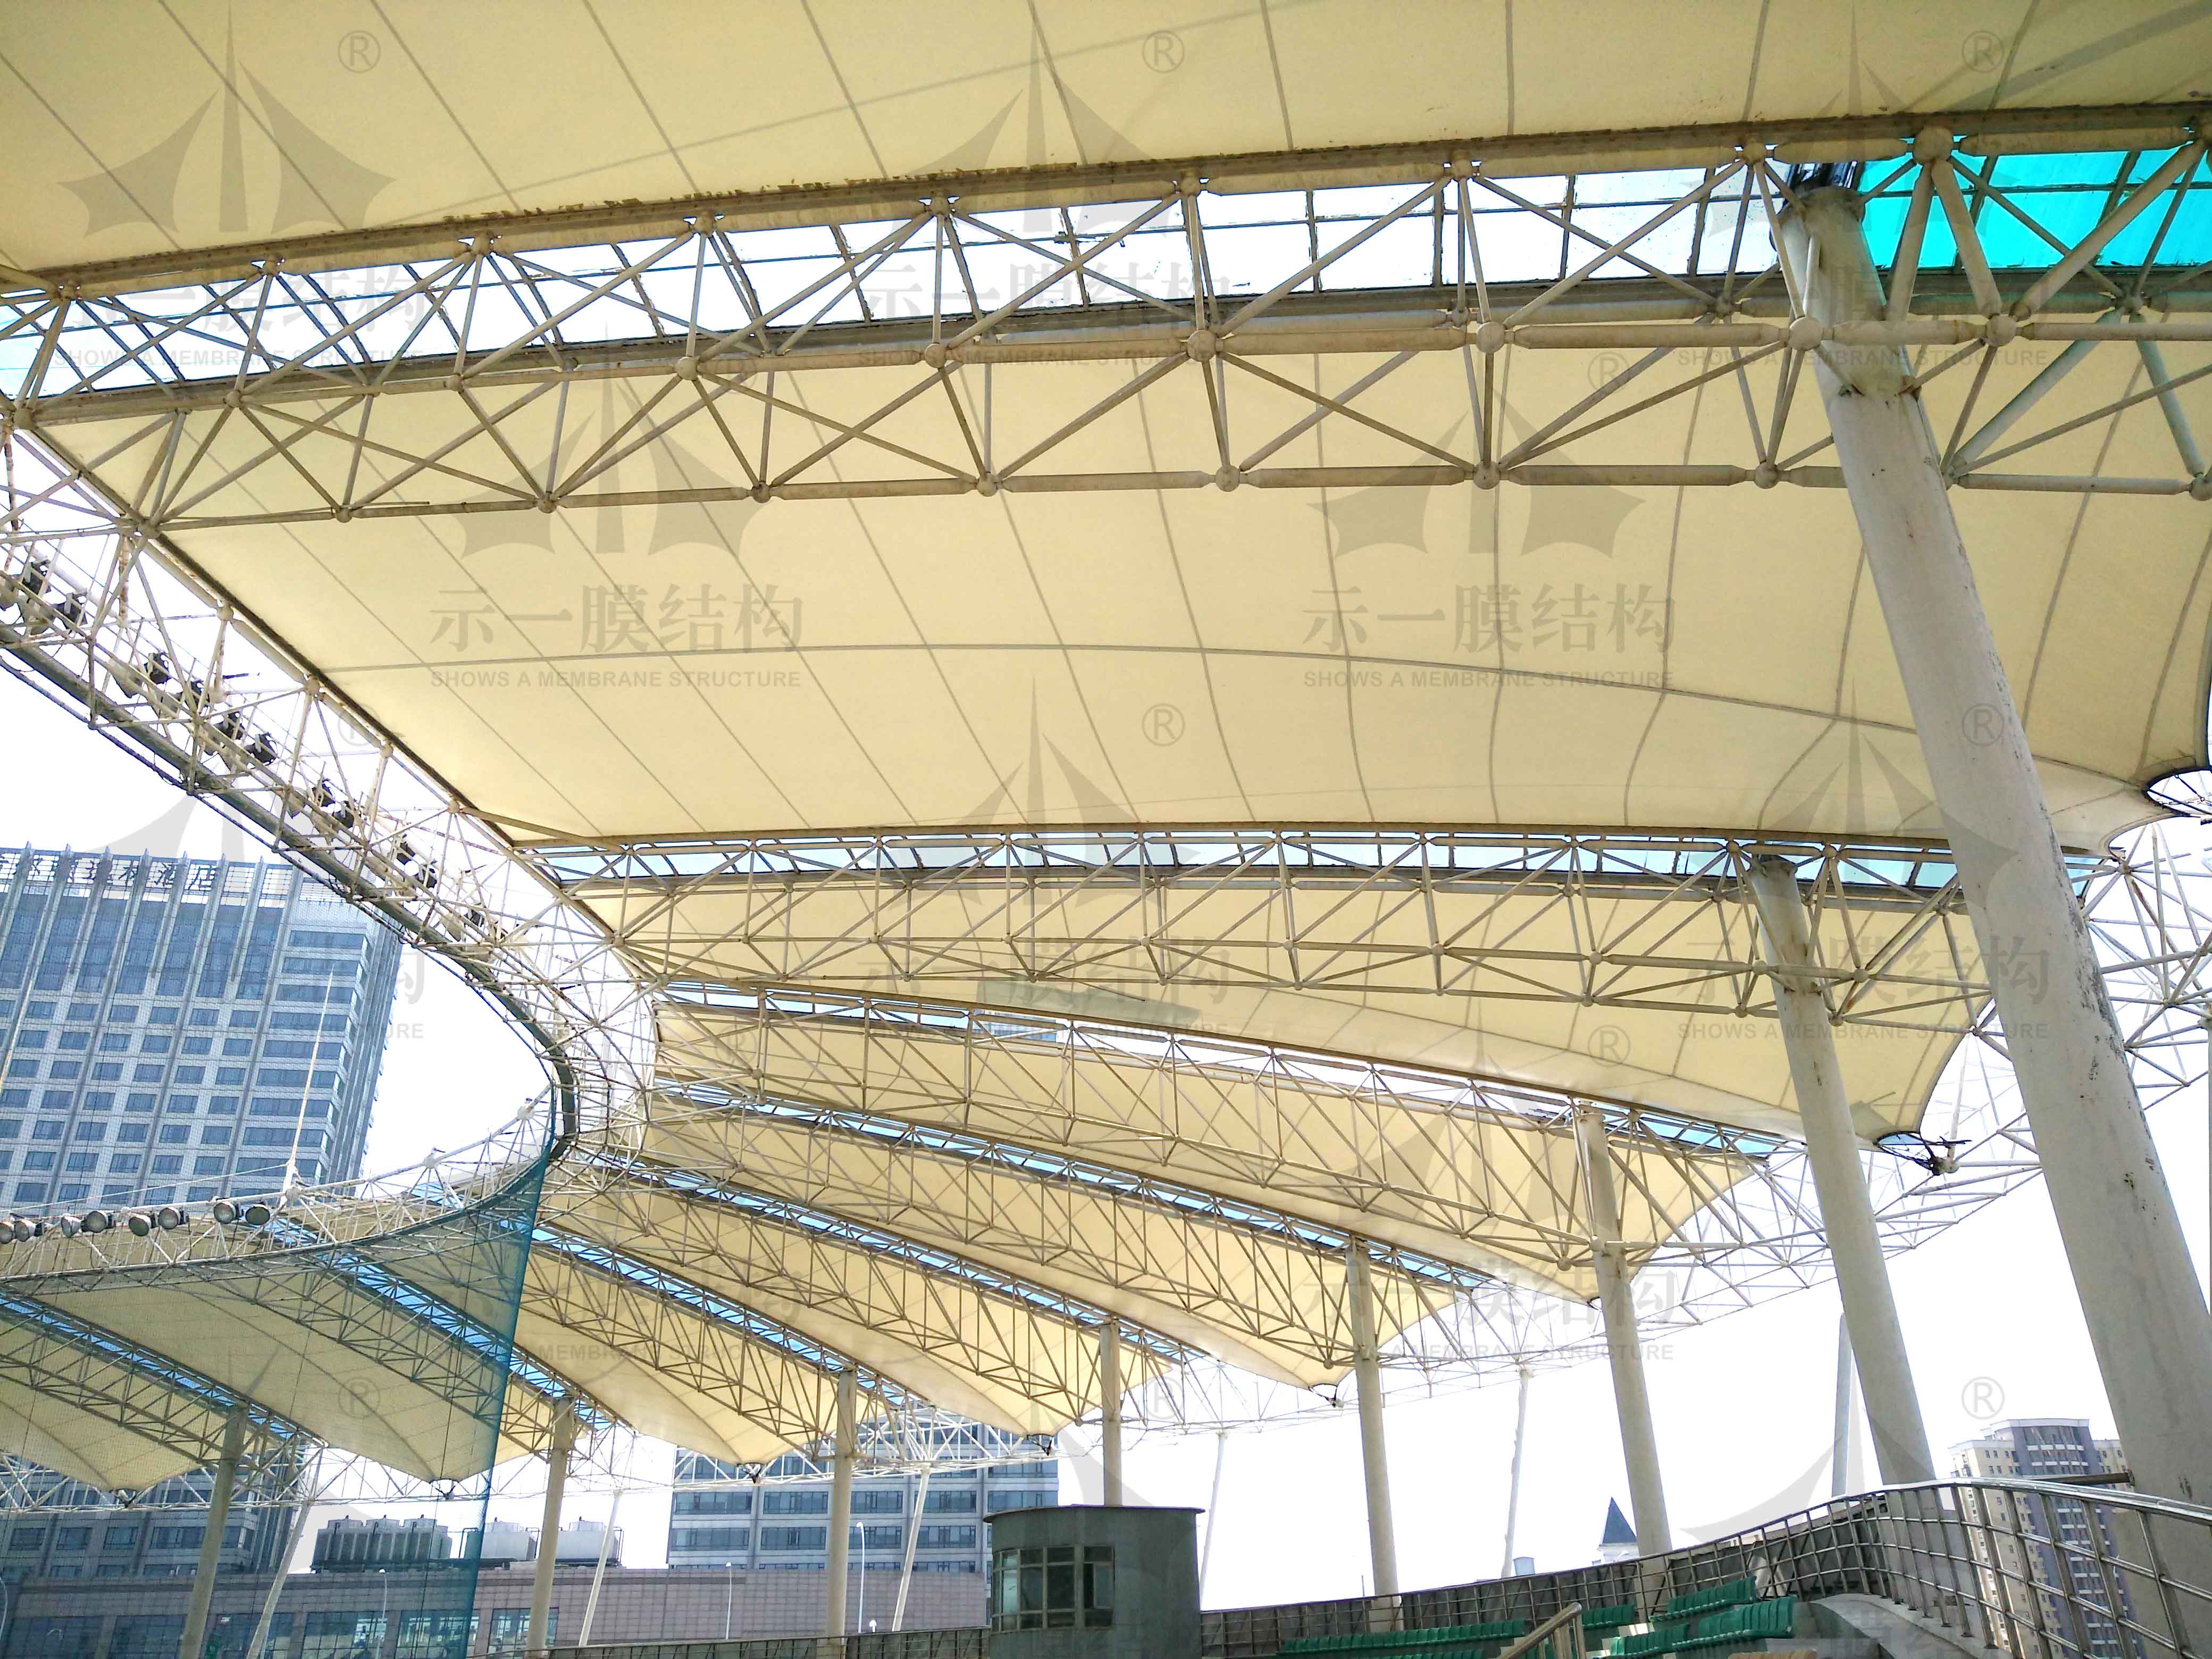 Membrane structure of the stands of Wuxi Baseball Stadium